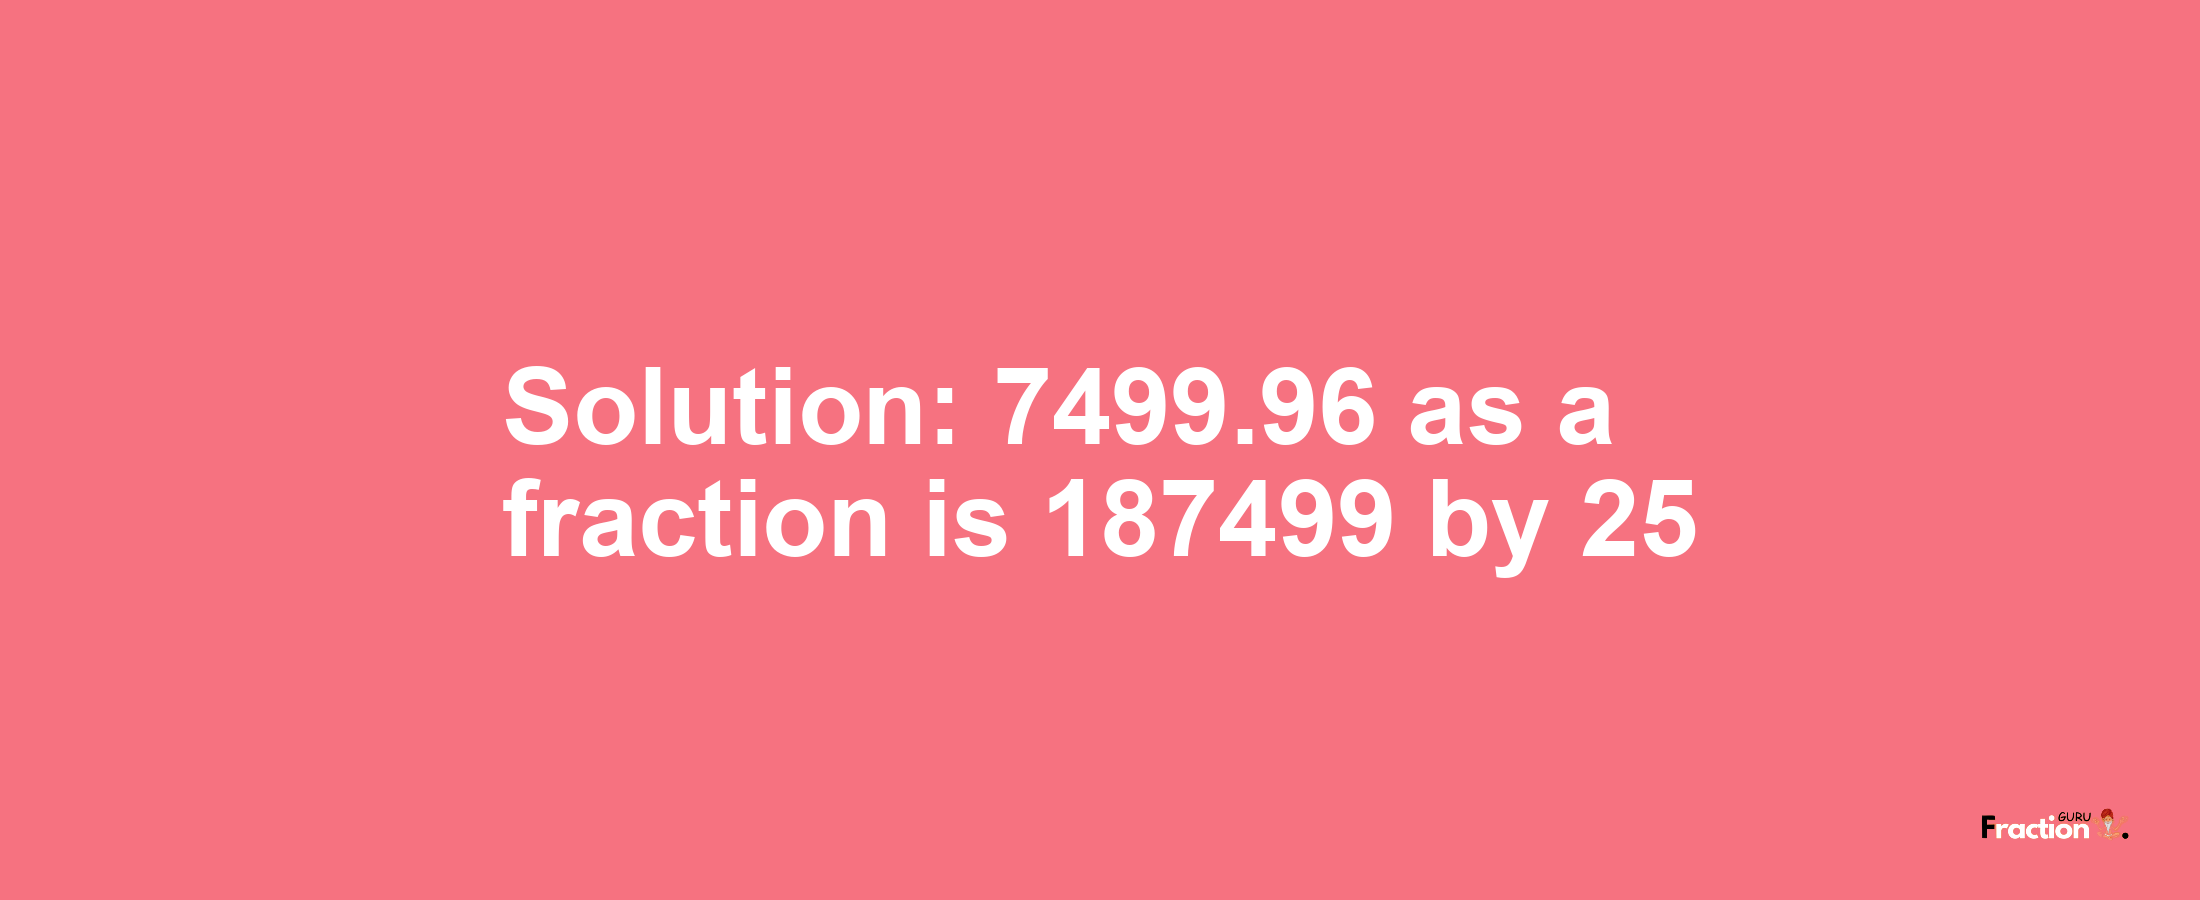 Solution:7499.96 as a fraction is 187499/25